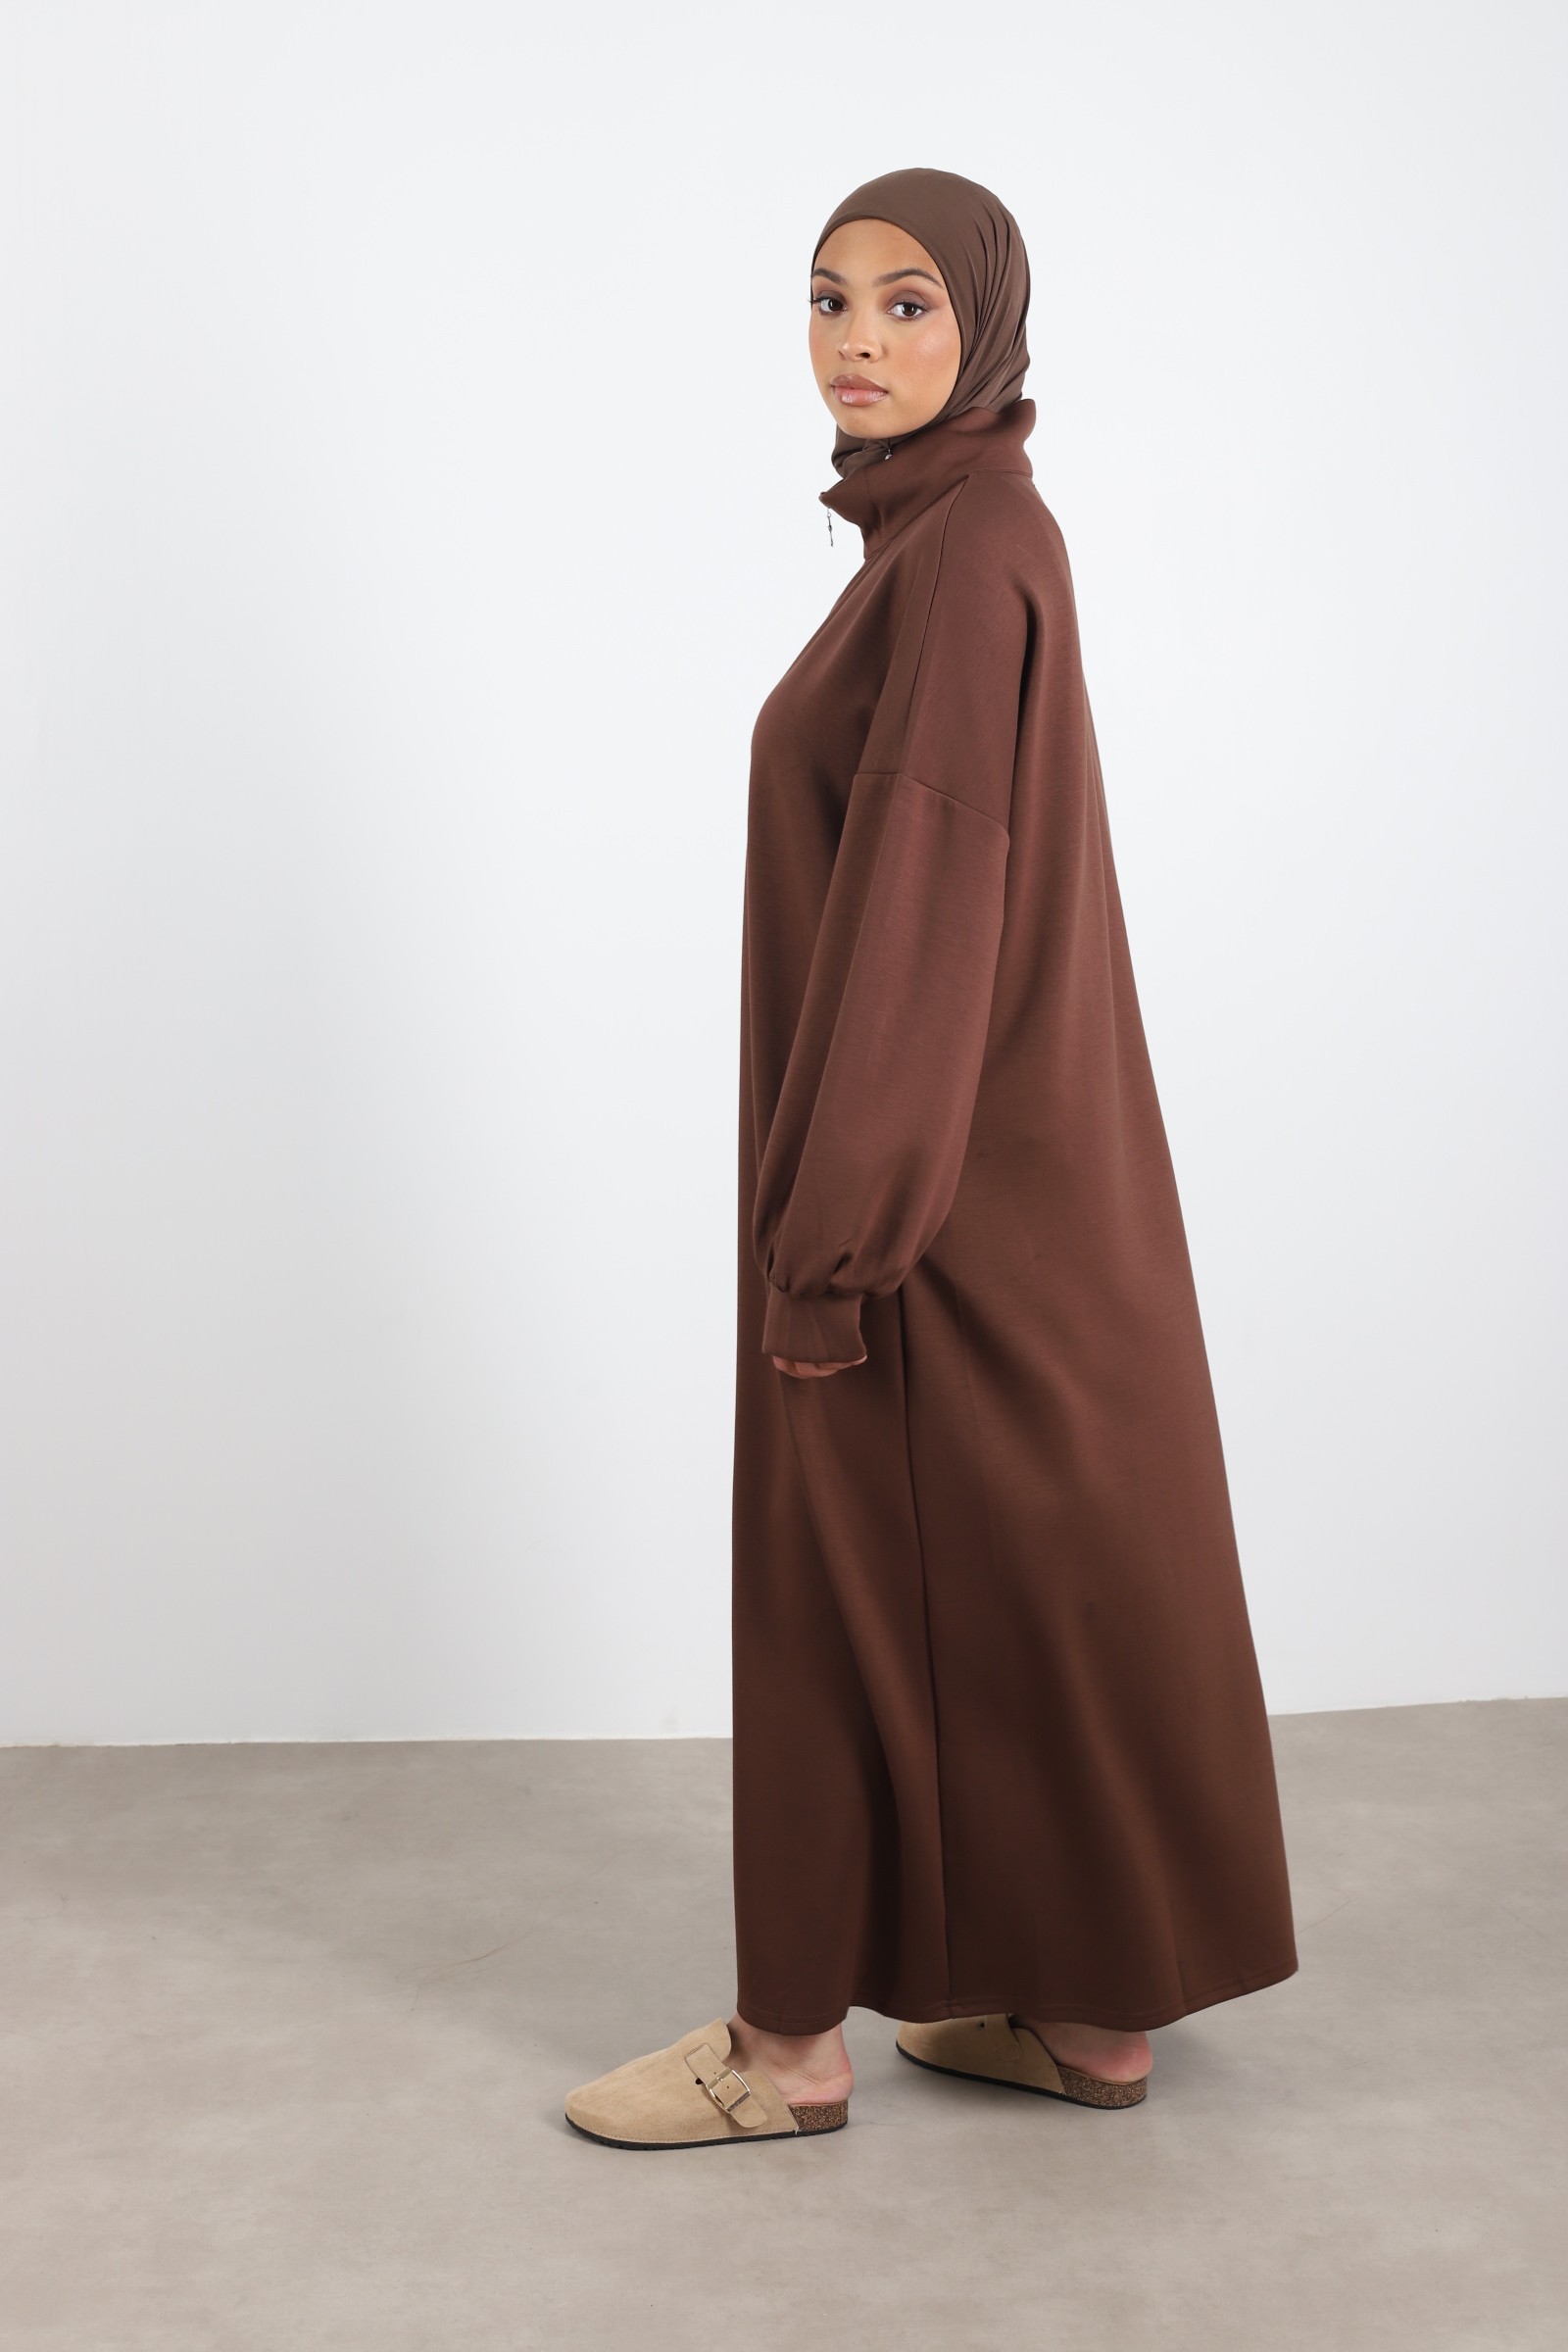 modest fashion long dress with zip